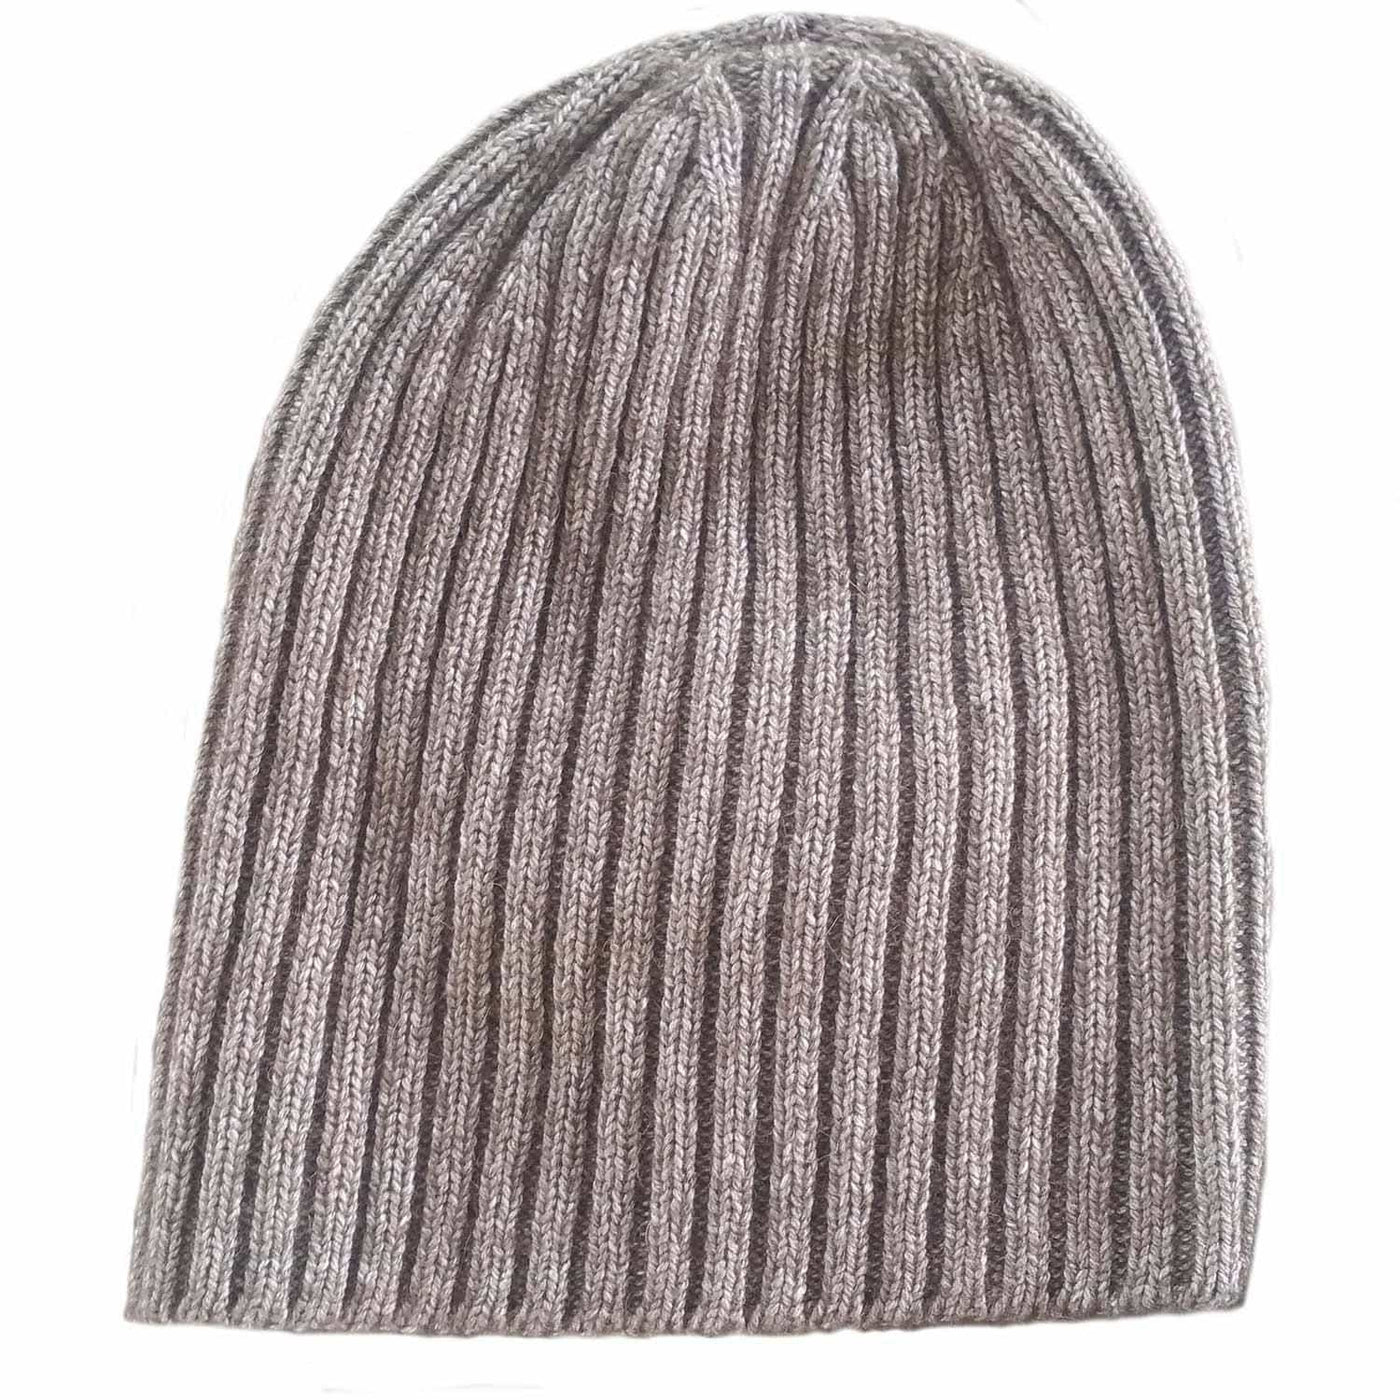 Ribbed Bison/Silk Knitted Hat Bison Gear The Buffalo Wool Co. Natural 